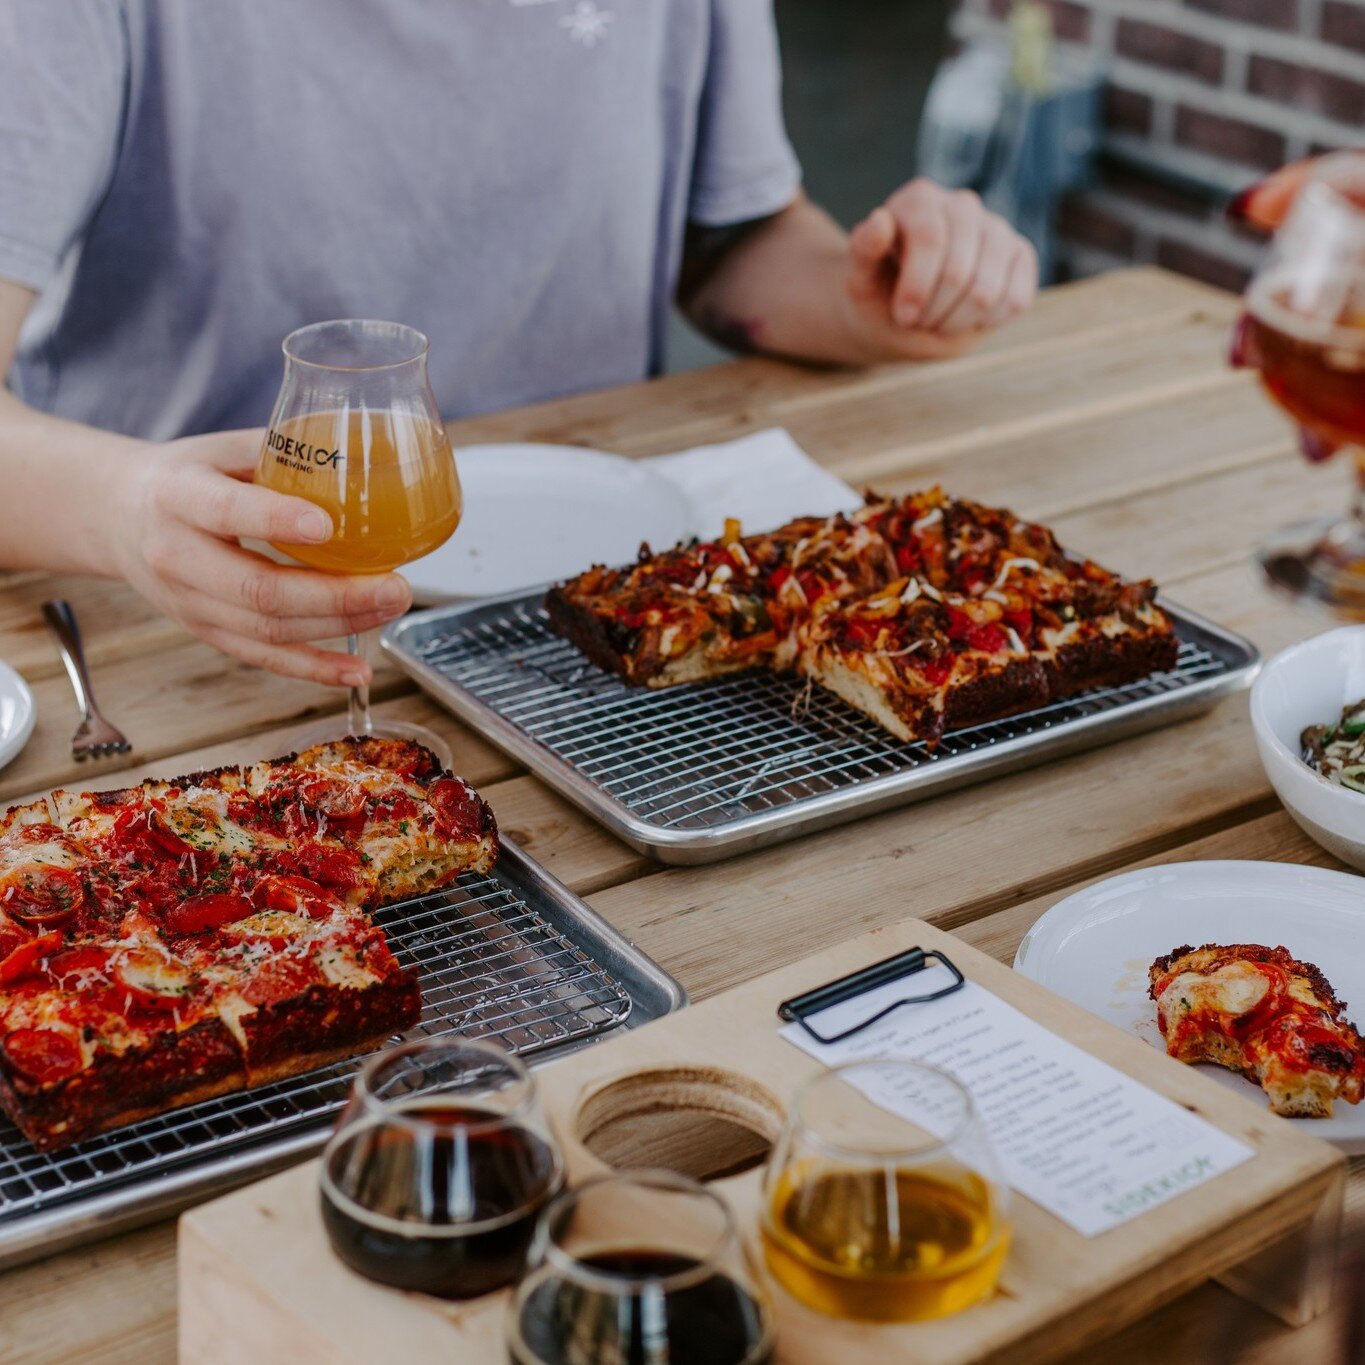 It's Wednesday - which means we've got Brewzza deals on till 6 pm! Come join us for a 20oz Sidekick Beer and Pizza for $25! 

There's a nice breeze on the patio coming off the river!